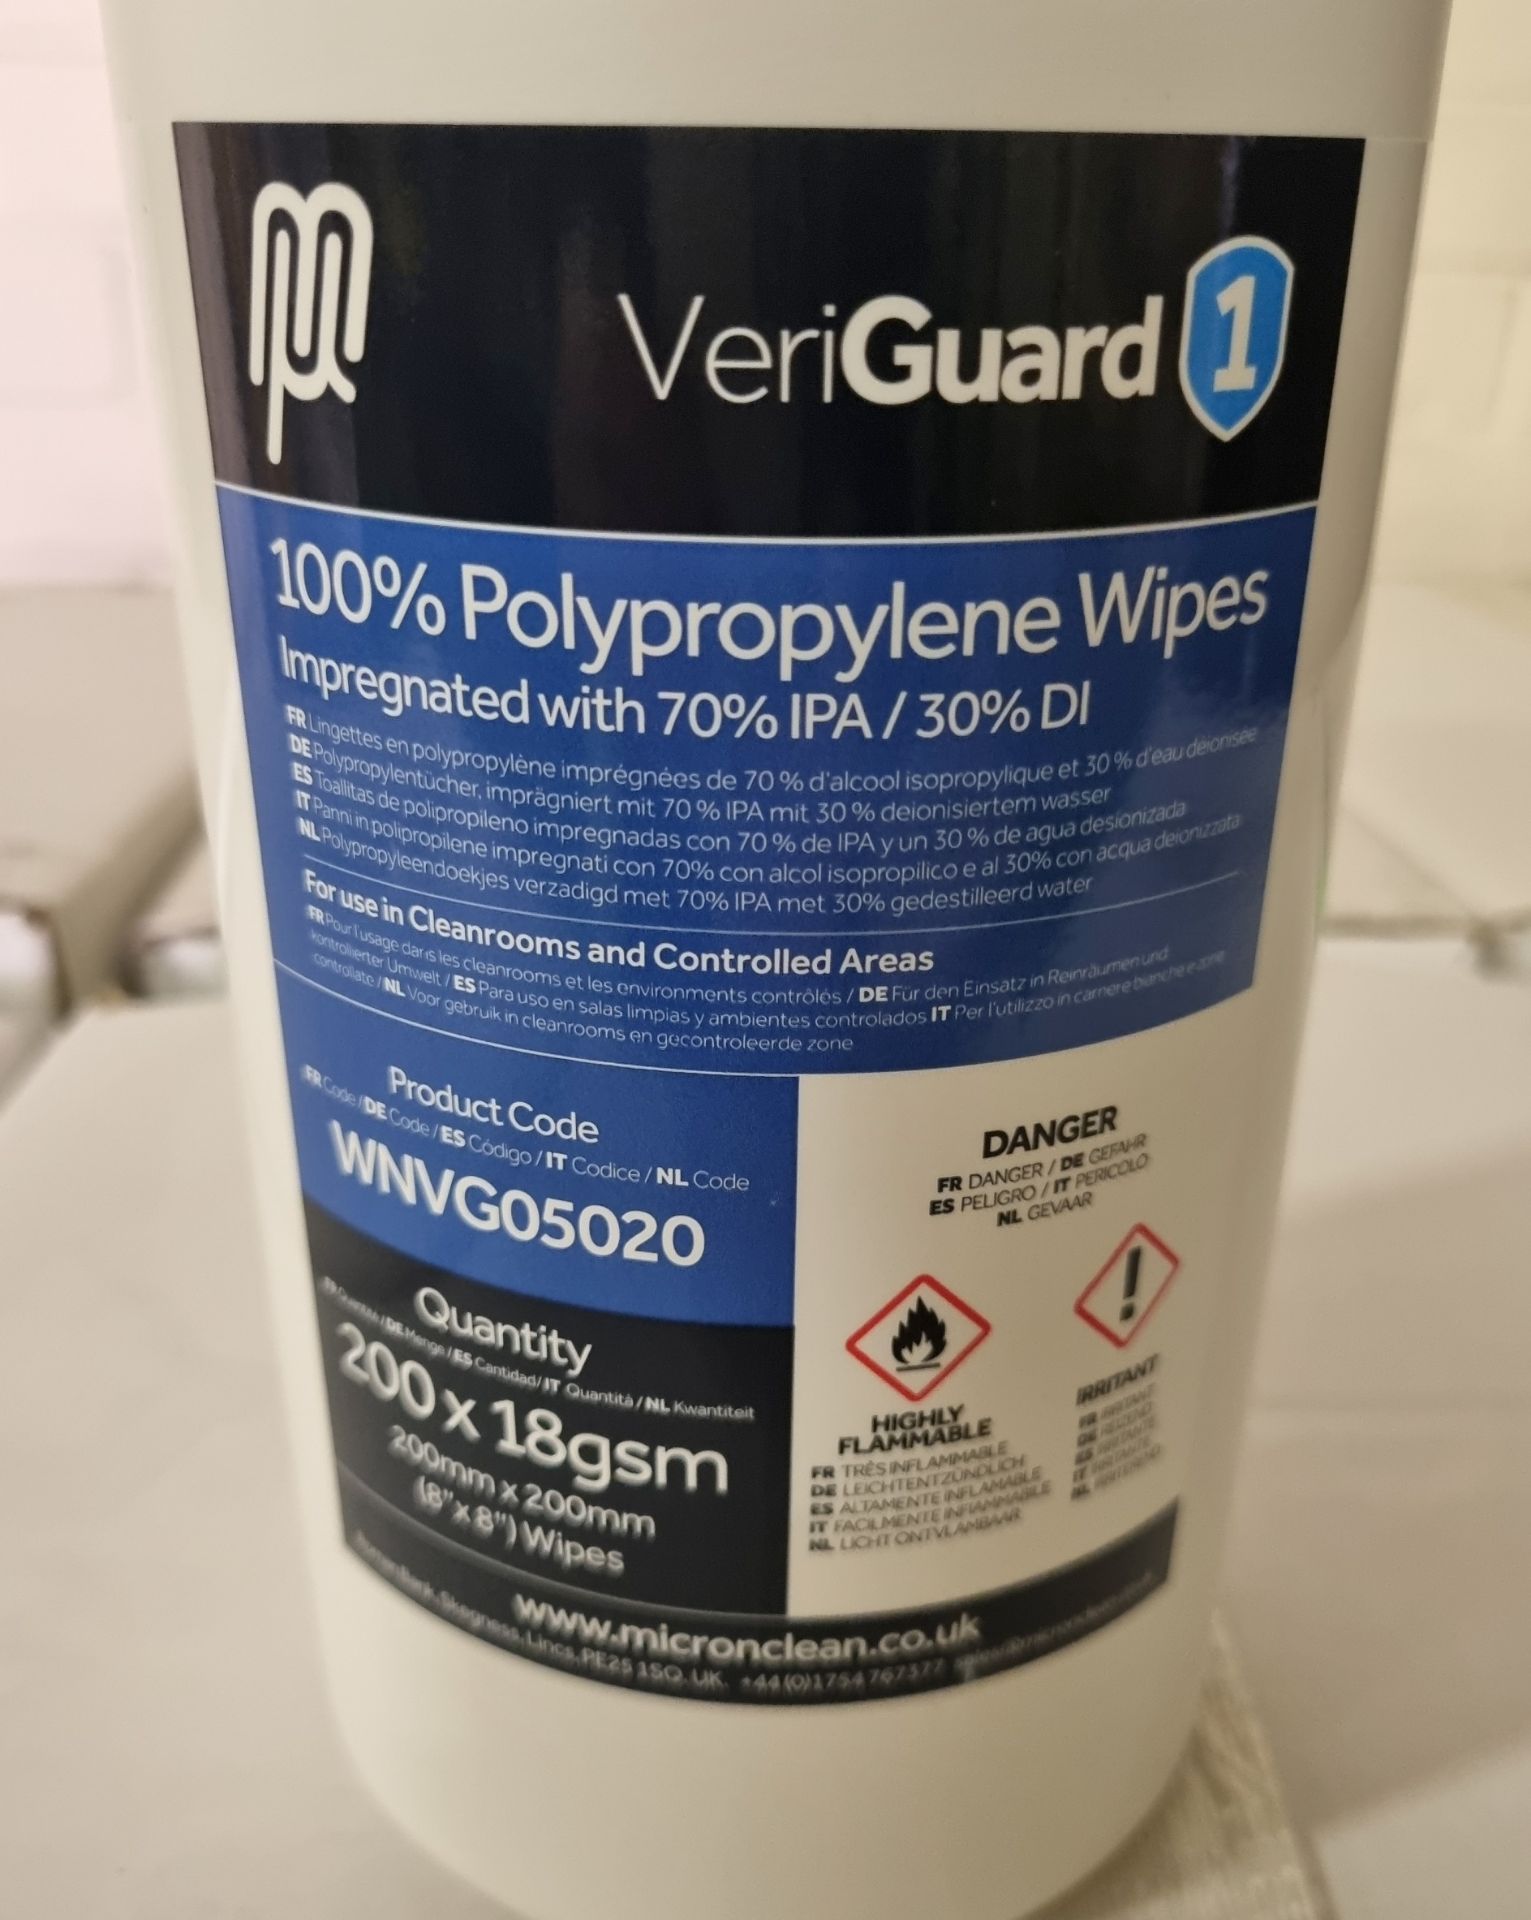 18x boxes of 12x Micronclean Veriguard 1 polypropylene 8"x 8" tube wipes - 12 per box - Image 2 of 5